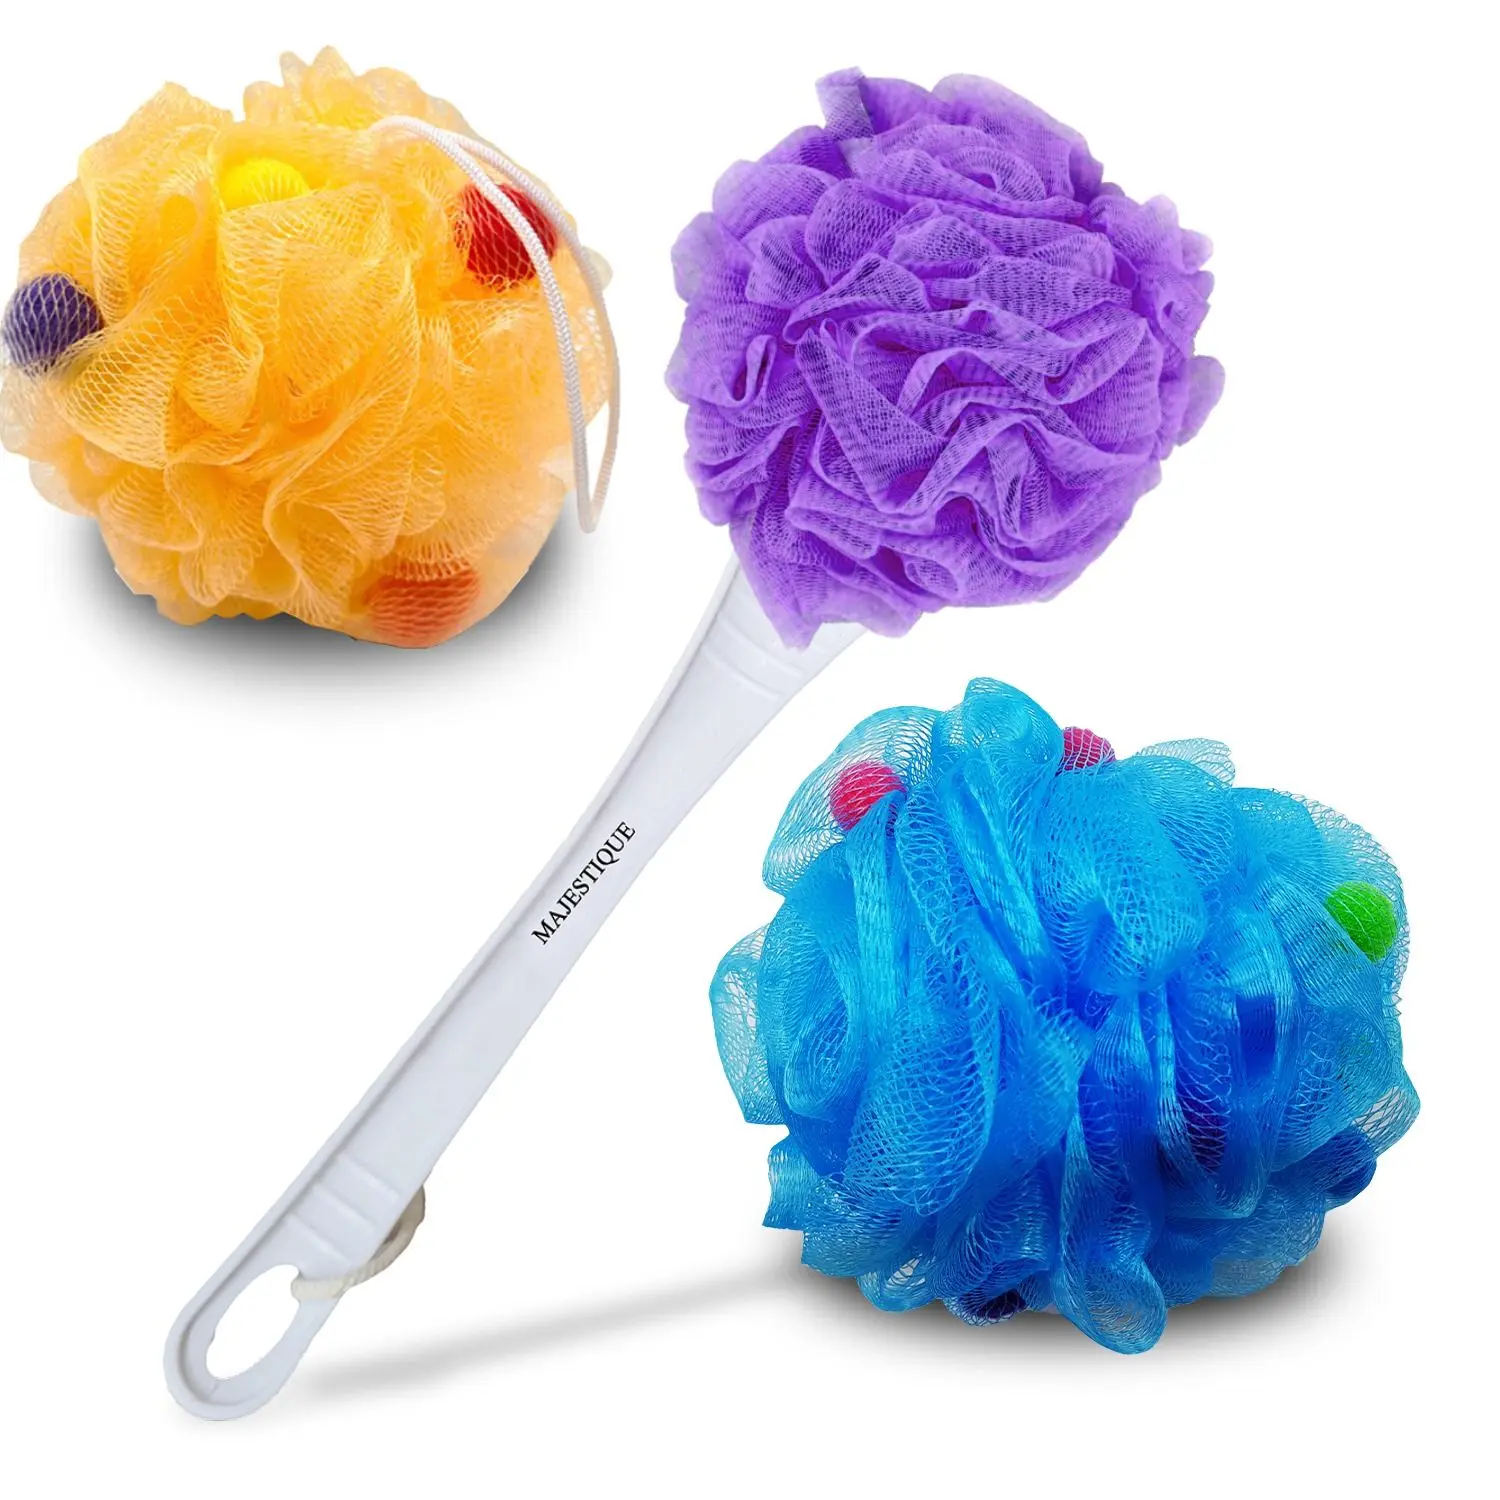 Majestique Body Loofah 3Pcs Set - Ball Round Exfoliating Loofah with Long Handle Loofah - Soft Exfoliating Shower Home - Color May Vary